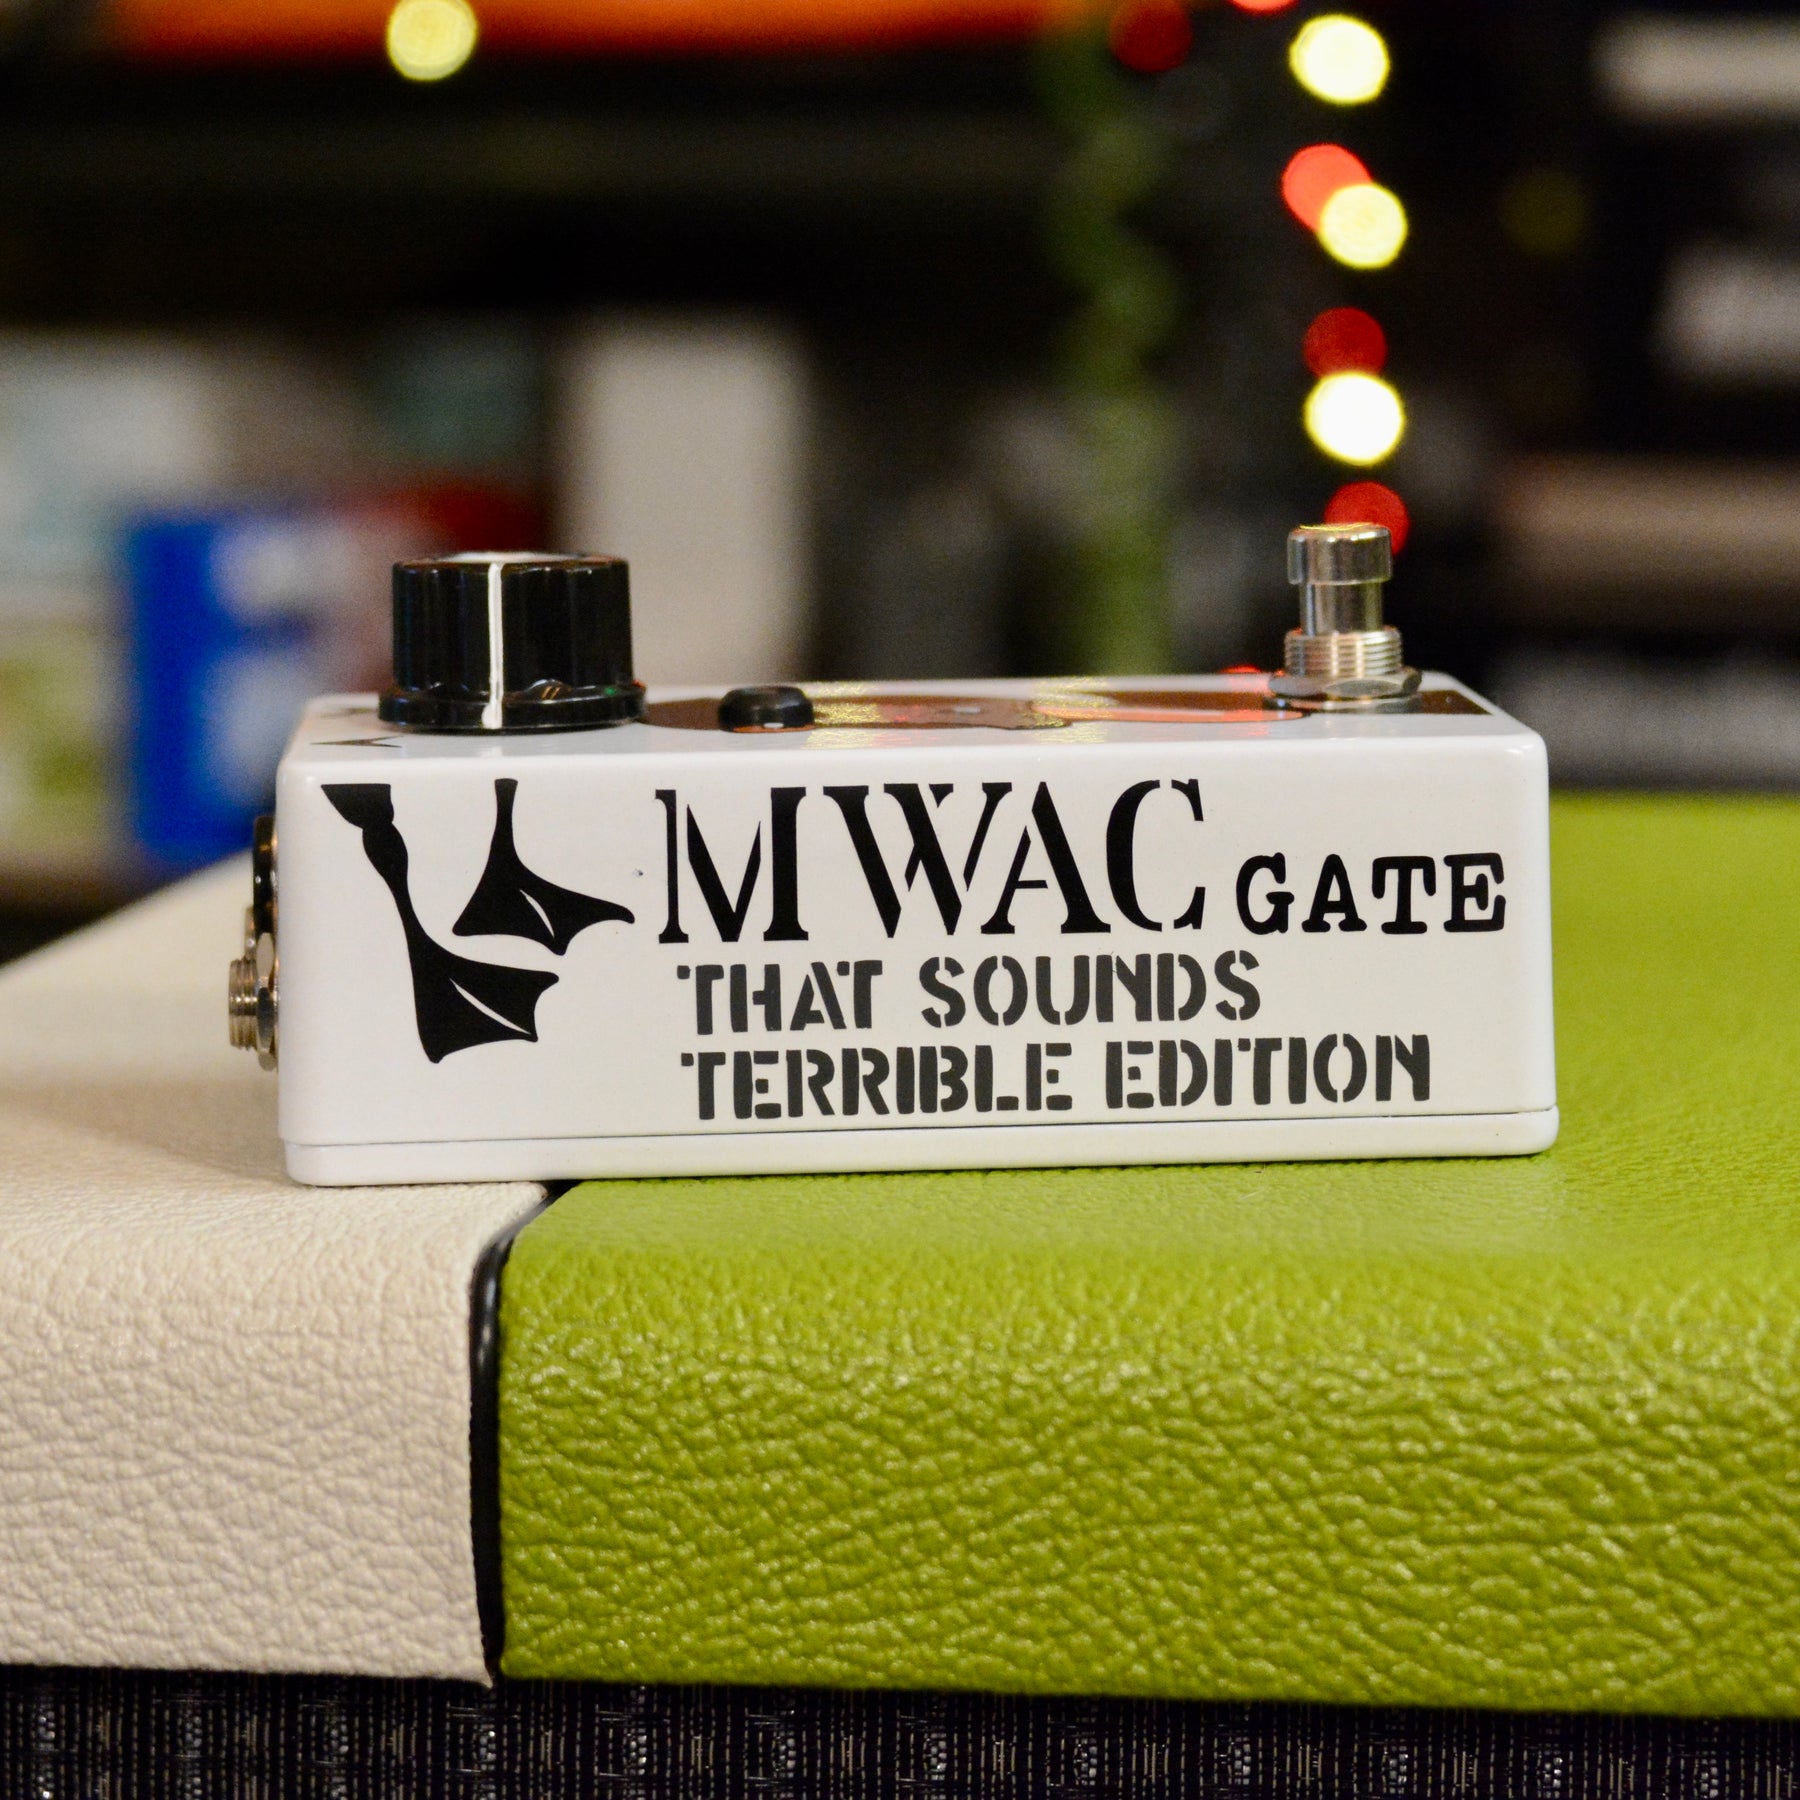 MWAC Gate - That Sounds Terrible edition